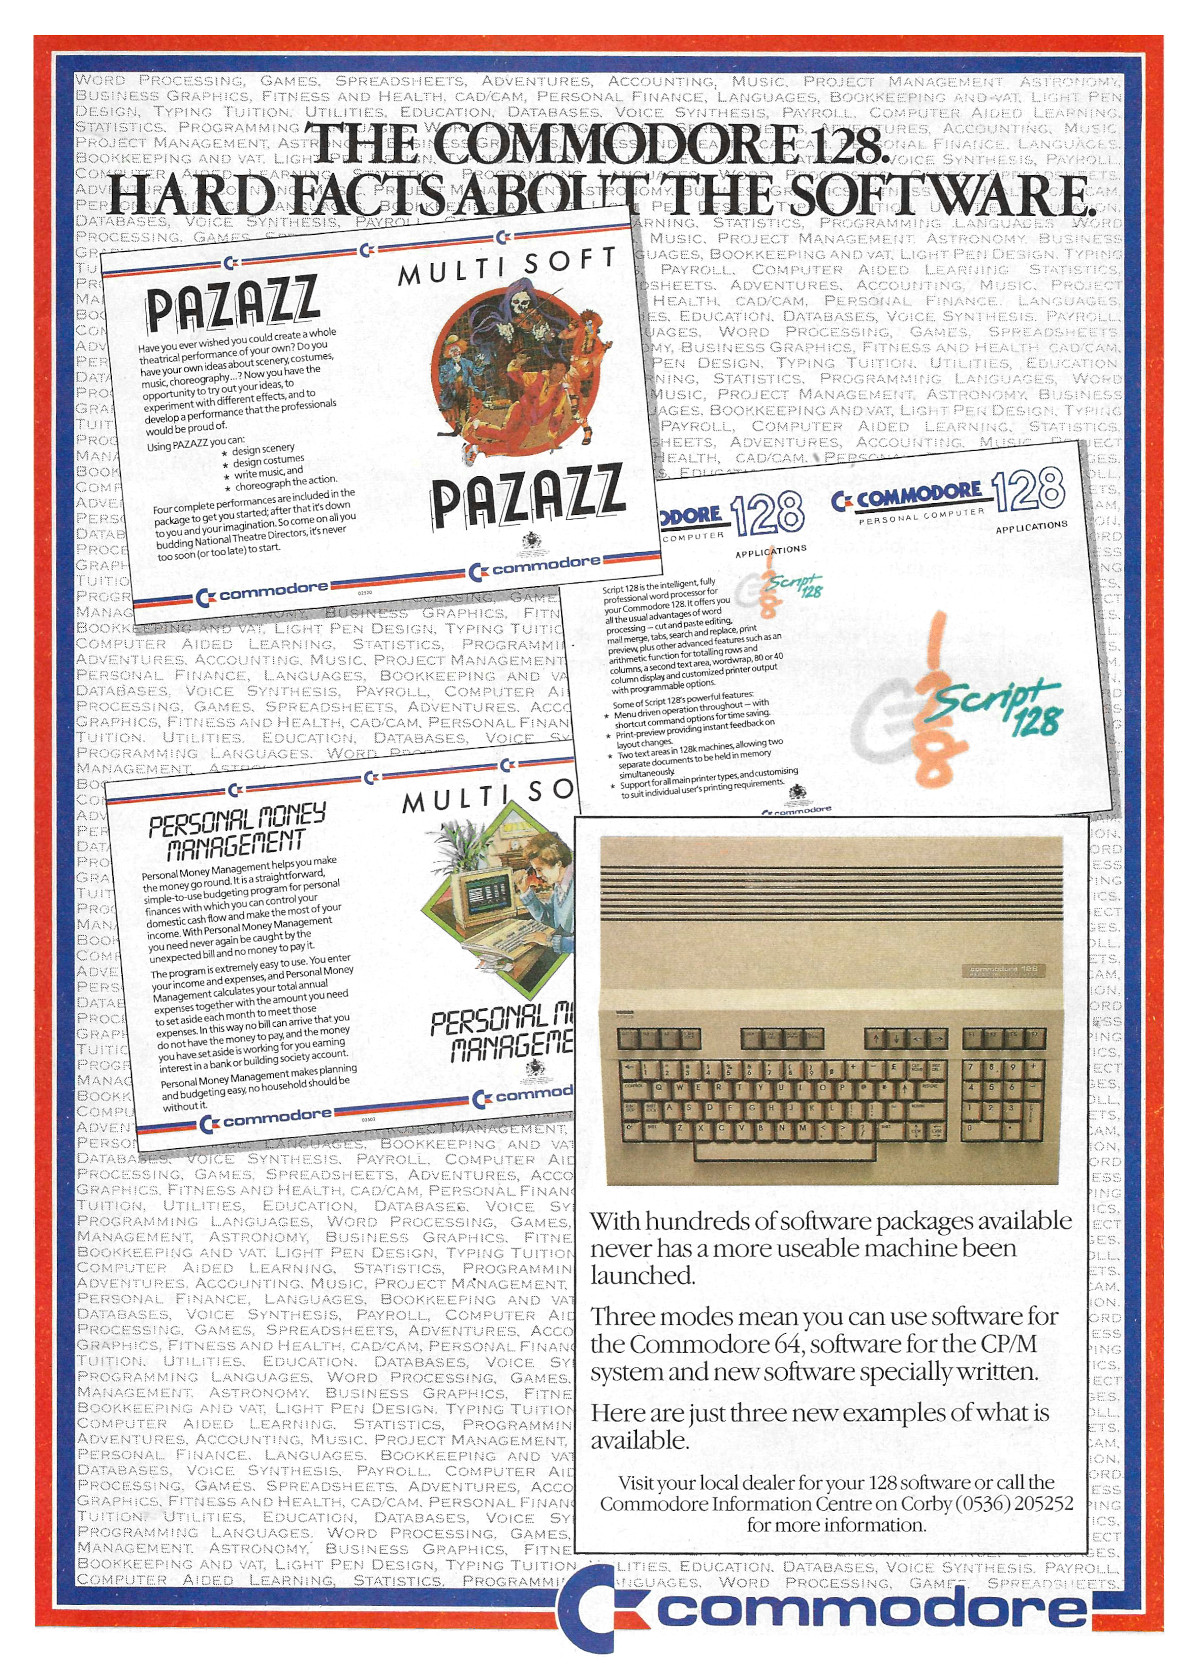 An advert for C128 <span class='hilite'><span class='hilite'><span class='hilite'>software</span></span></span>, running concurrently with the launch of the machine, highlighting the multiple modes available and reinforcing how much <span class='hilite'><span class='hilite'><span class='hilite'>software</span></span></span> is already available. From Your Computer, January 1986